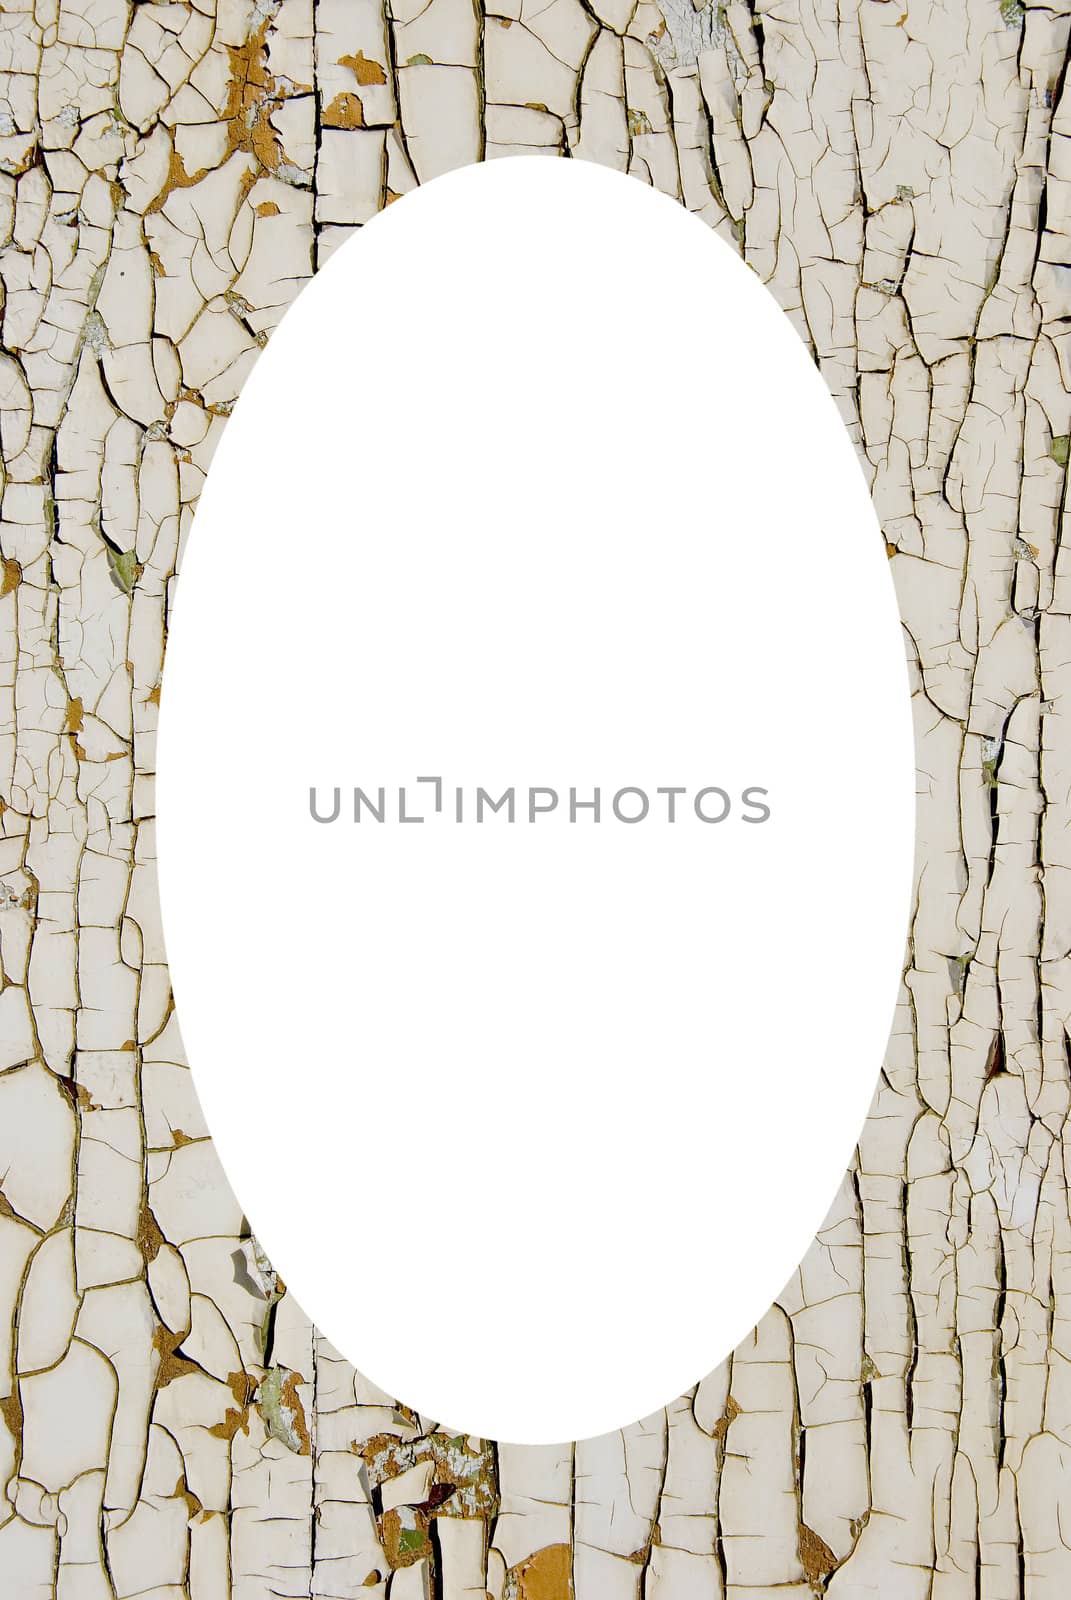 Details of old loosing white paint wall background. Isolated white oval place for text photograph image in center of frame.